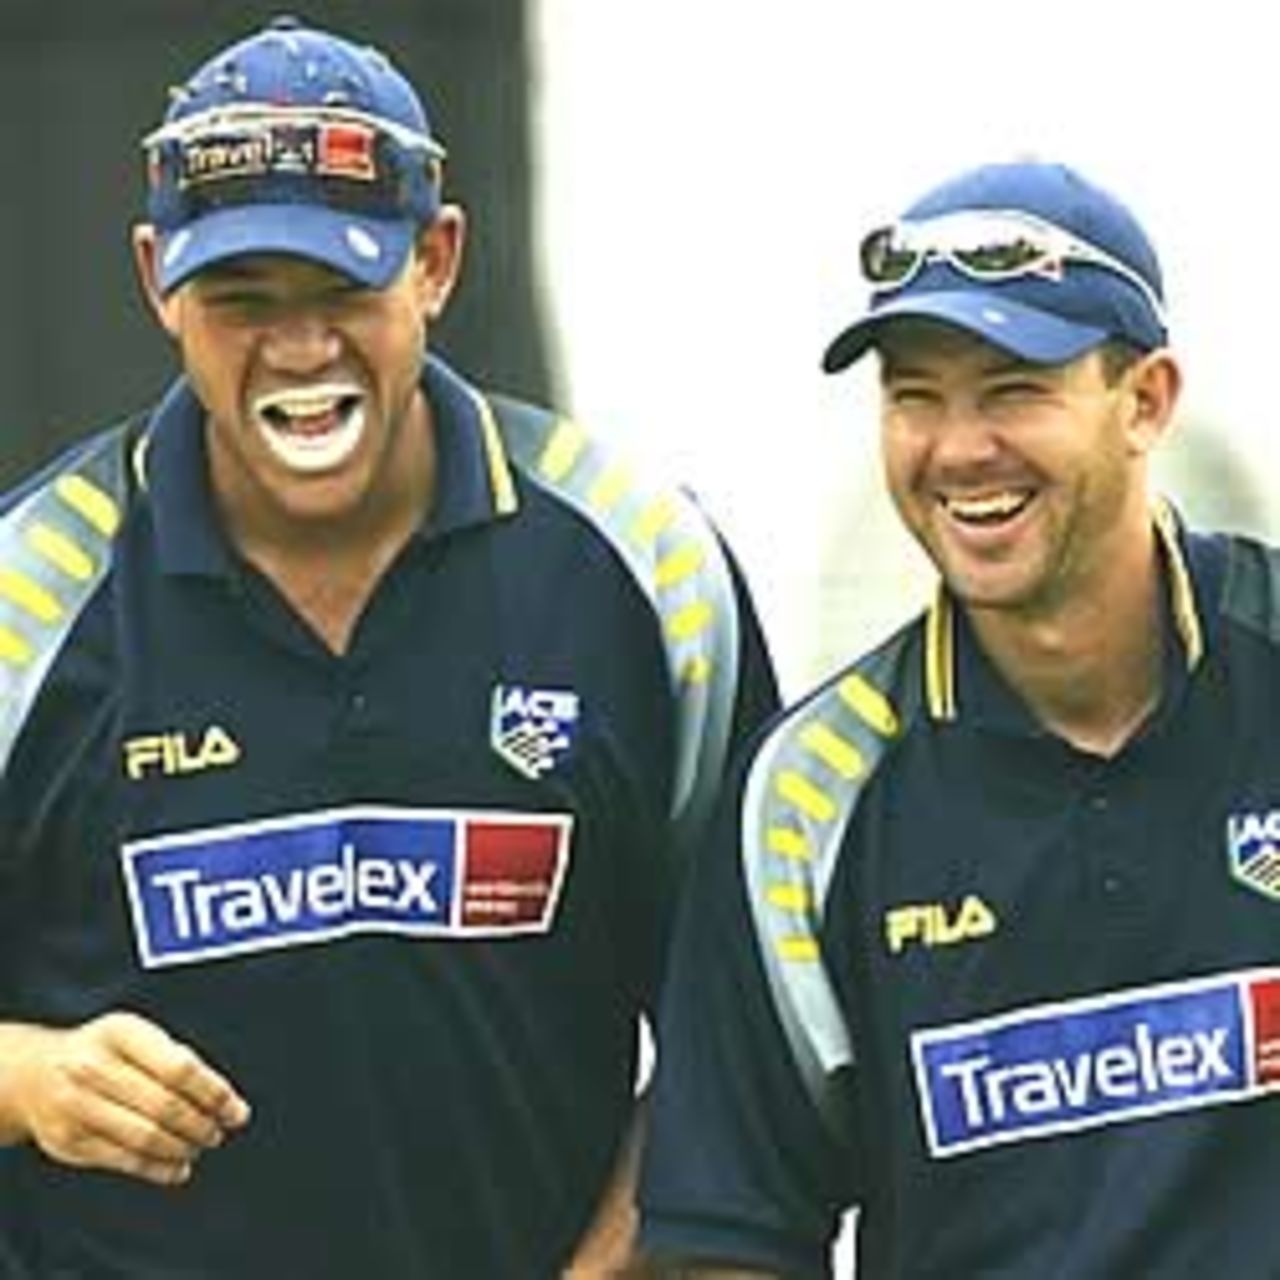 JOHANNESBURG- MARCH 21: Andrew Symonds (L) and Ricky Ponting of Australia share a joke during training at the Wanderers, Johannesburg, South Africa, on March 21, 2003.